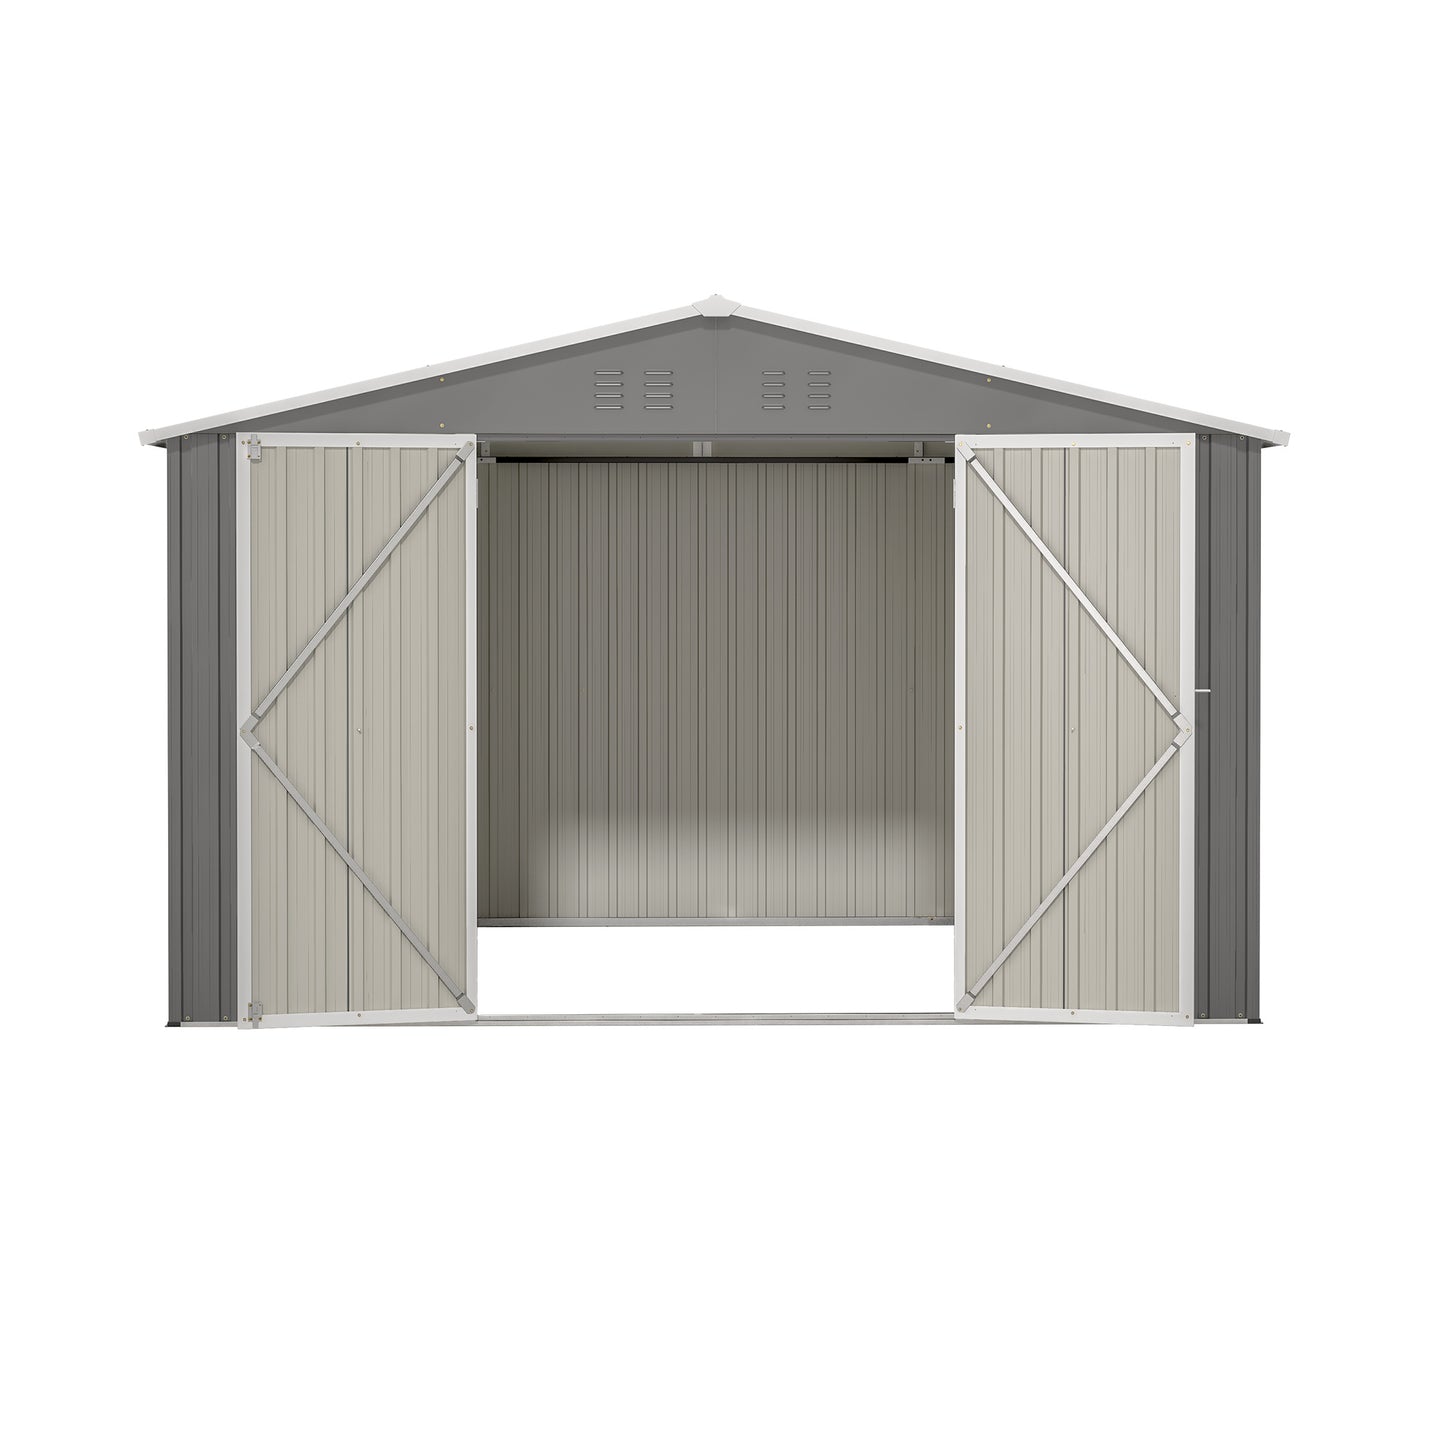 10X8 FT Outdoor Storage Shed, All Weather Metal Sheds withLockable Doors, Tool Shed for Garden, Patio, Backyard, Lawn, Grey